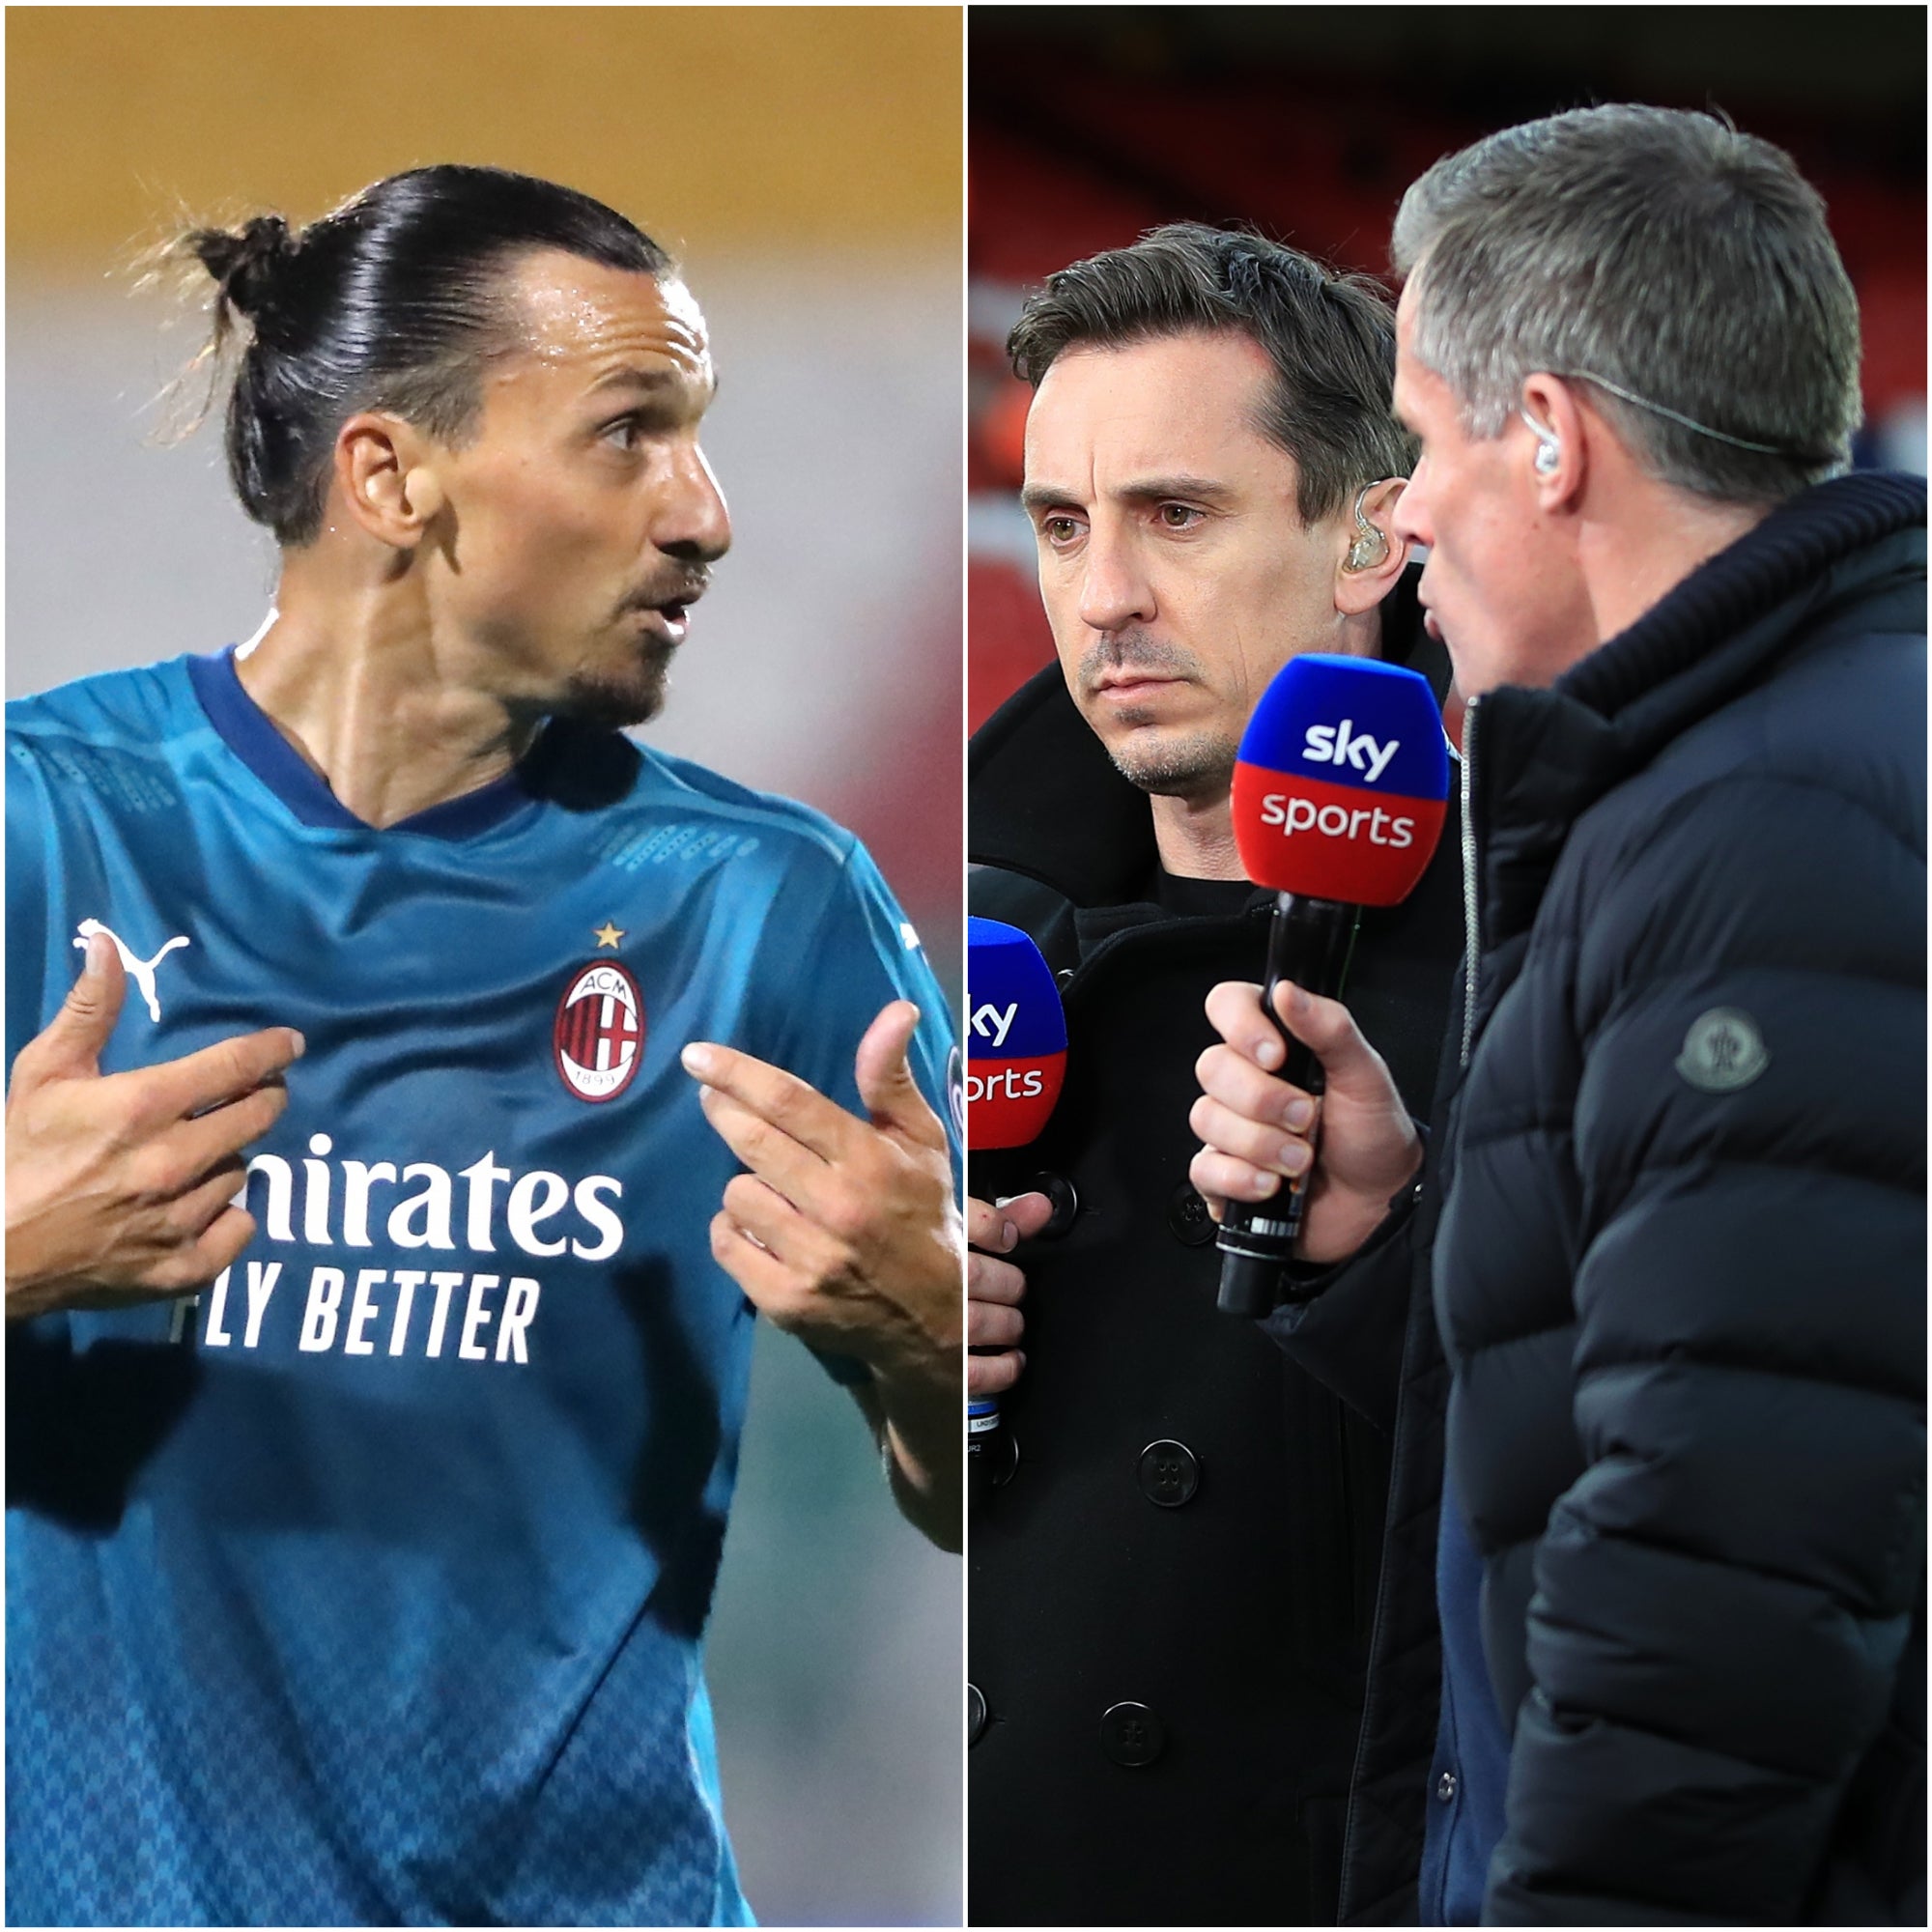 Zlatan Ibrahimovic took off and Gary Neville and Jamie Carragher clashed (Niall Carson/Peter Byrne/PA)